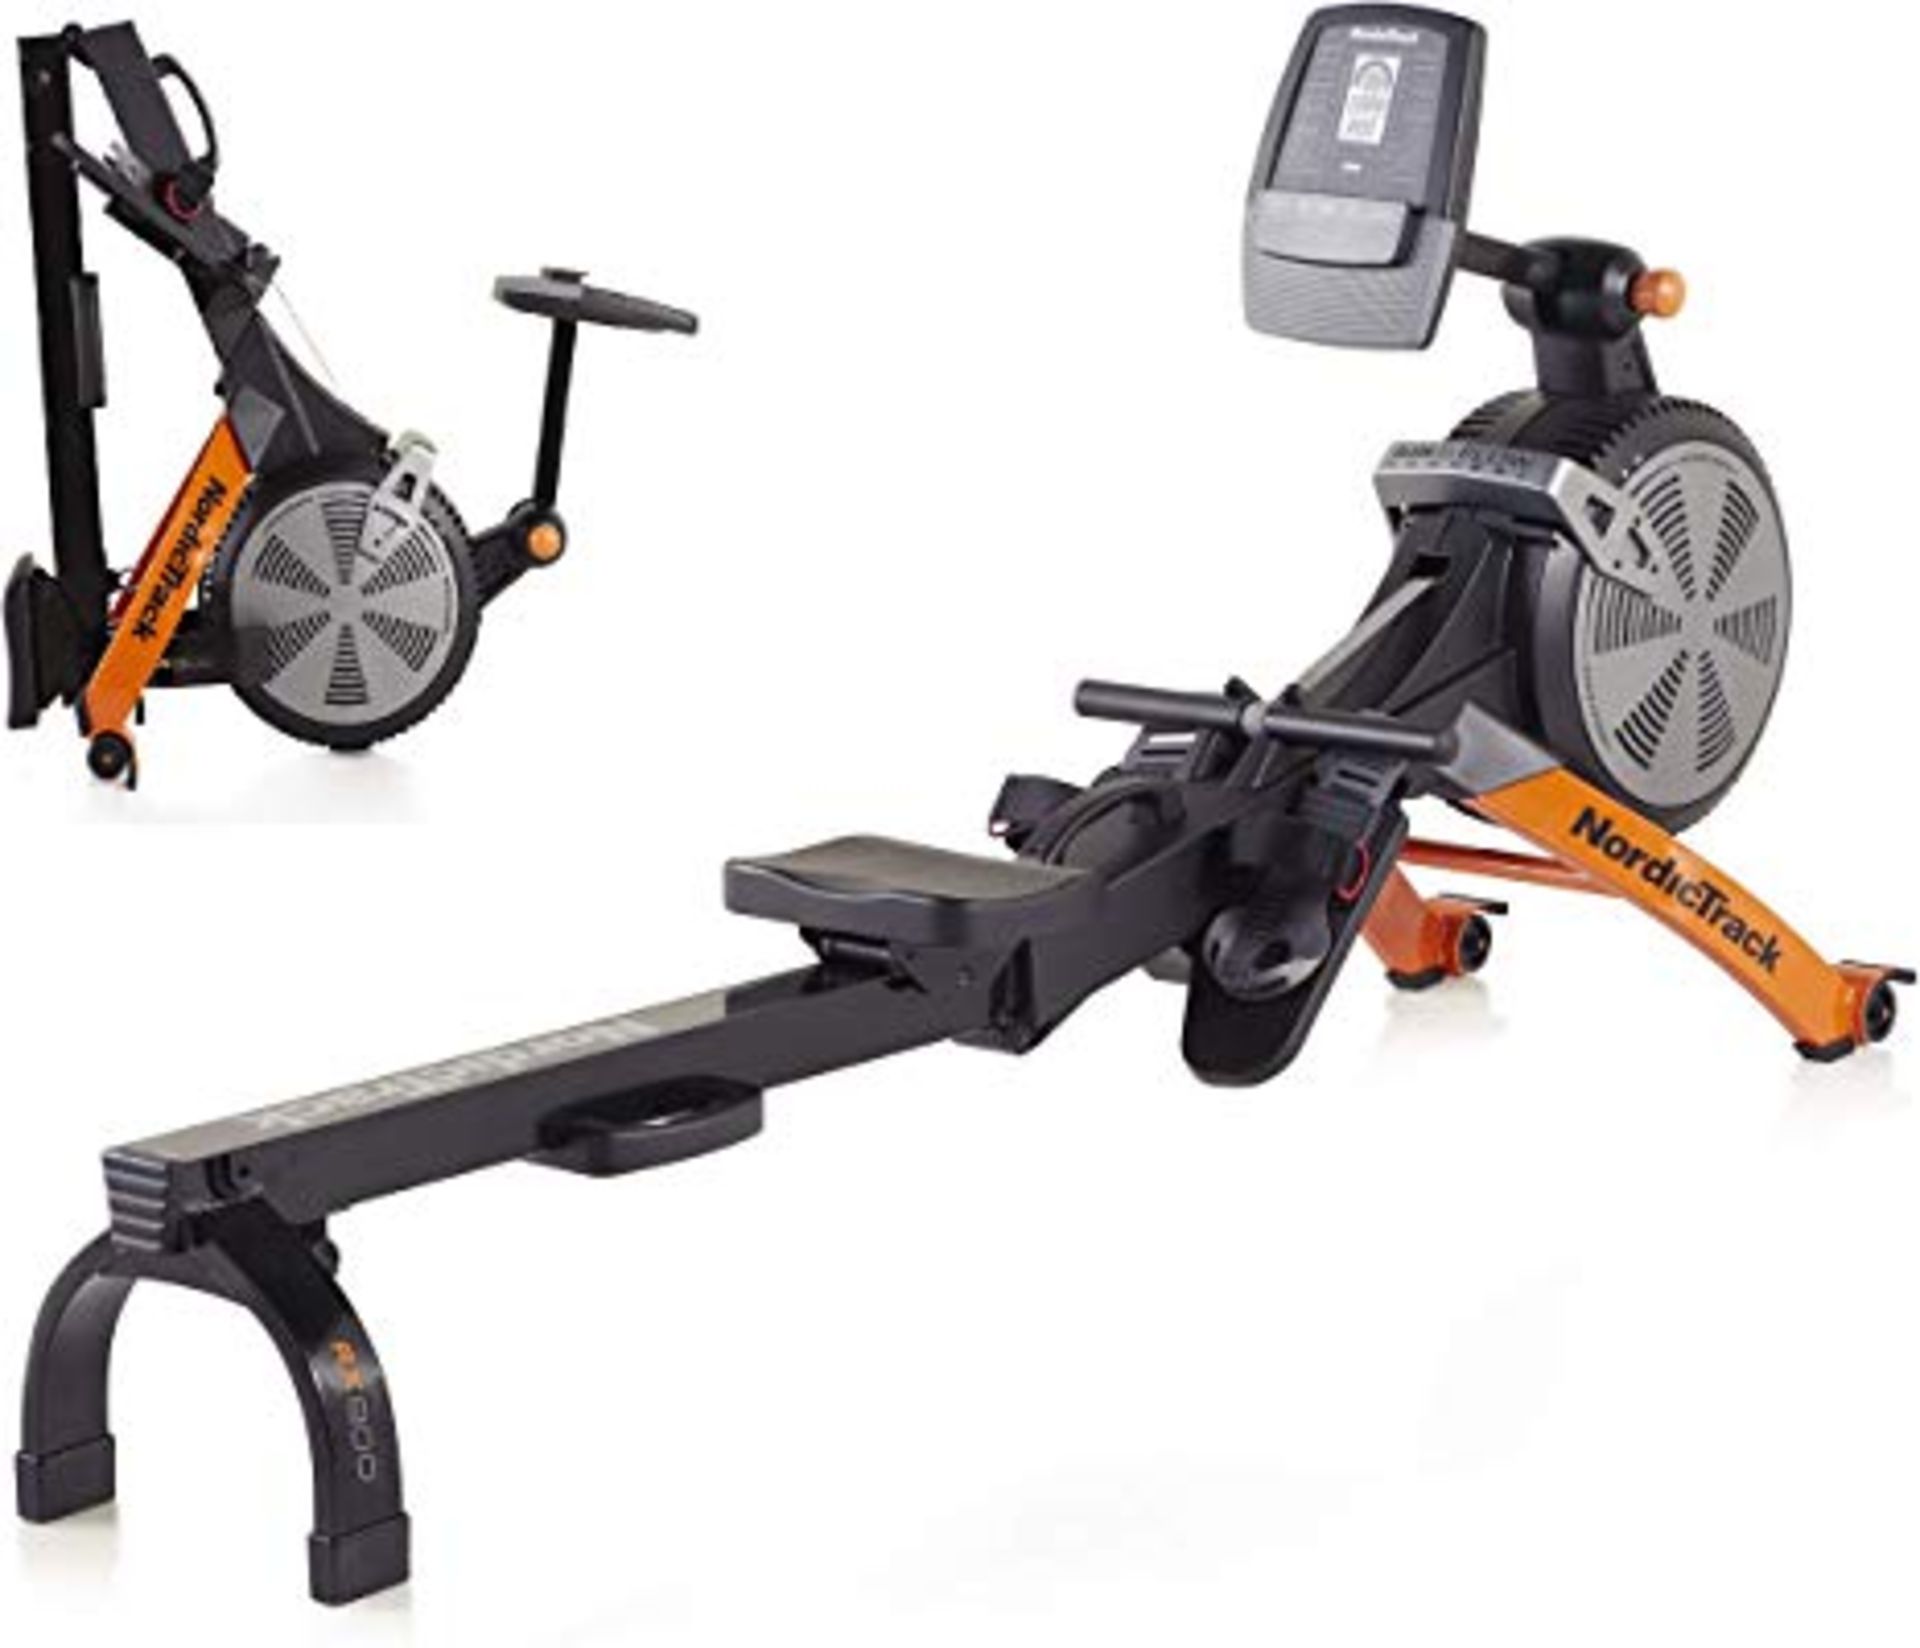 1 NORDIC TRACK RX800 ROWING MACHINE RRP Â£649 (VERY GOOD CONDITION)